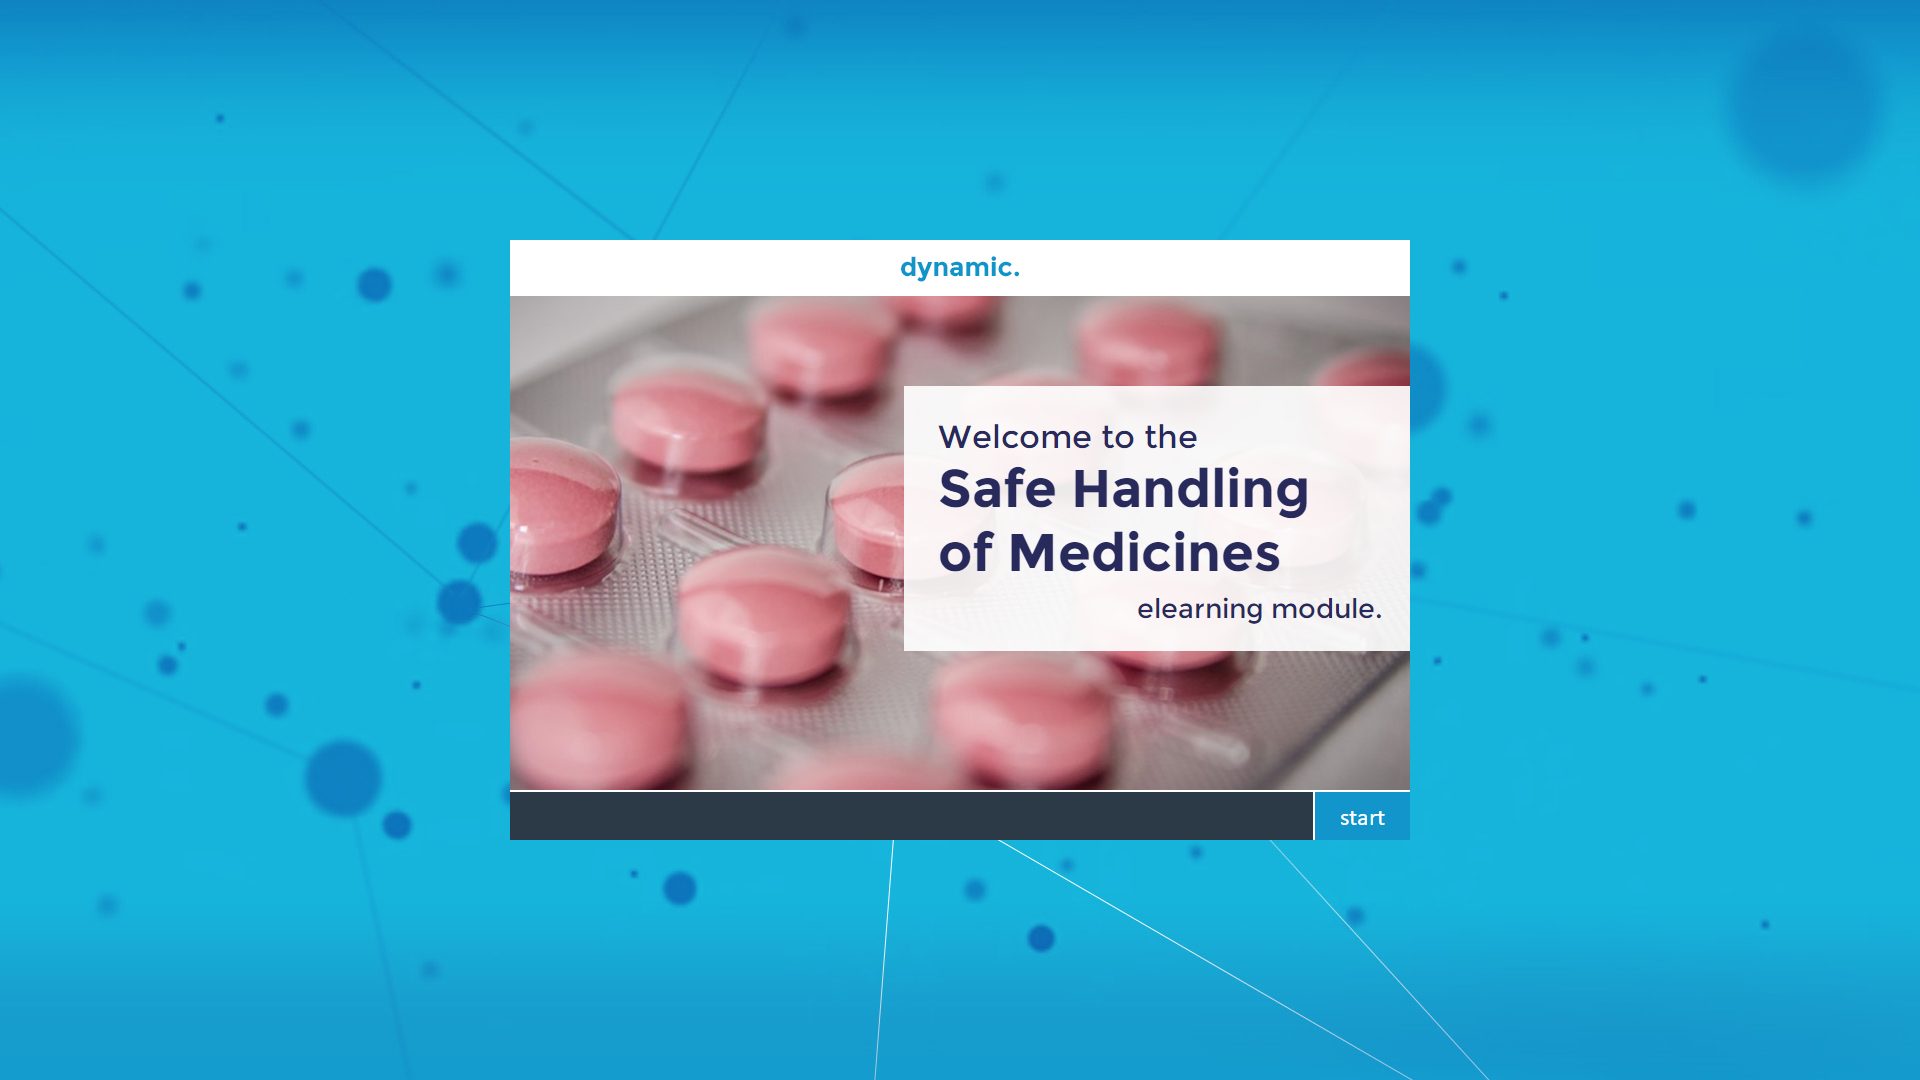 The title page for Dynamic's off-the-shelf eLearning module, safe handling of medicines.